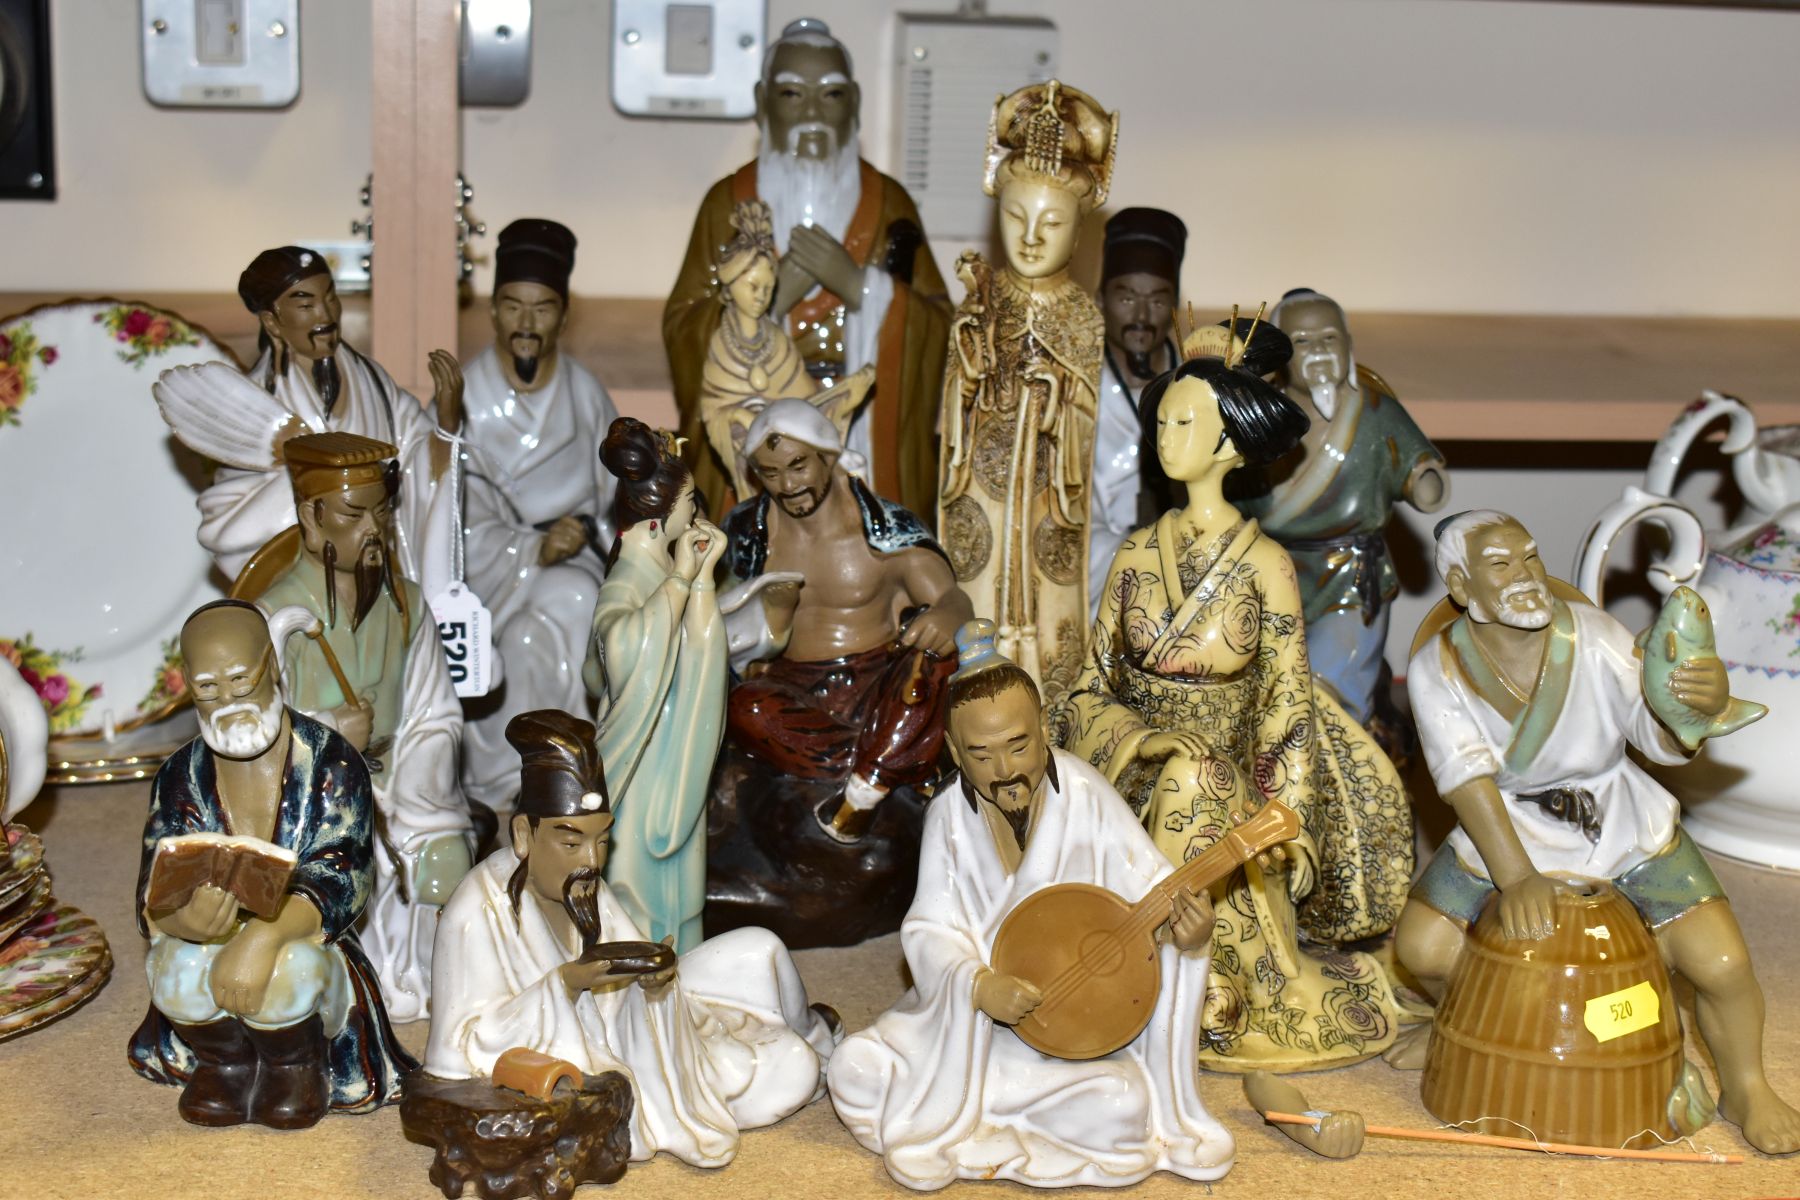 A GROUP OF MODERN ORIENTAL FIGURINES, to include fifteen figurines featuring people reading, fishing